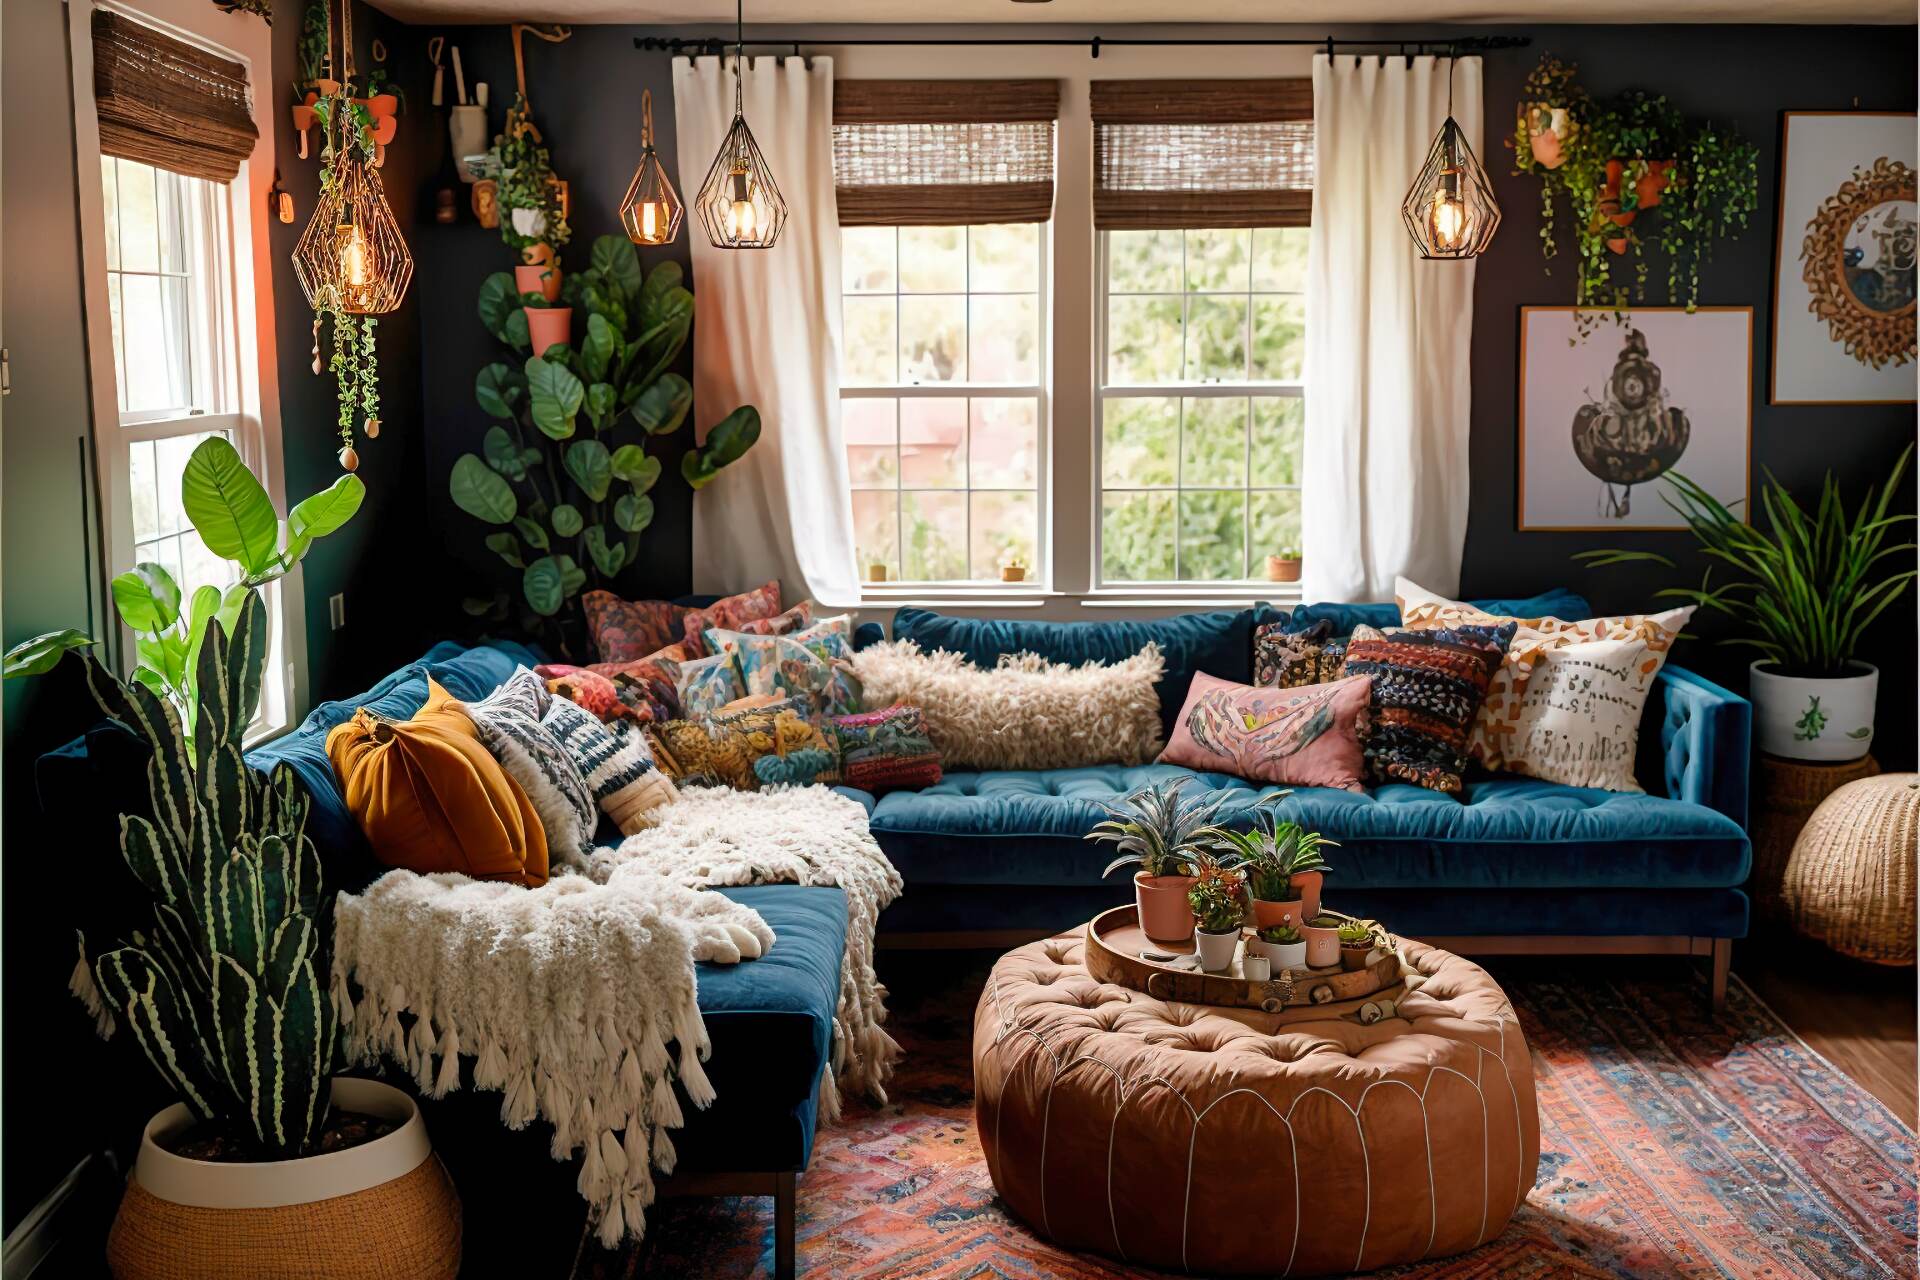 This Bohemian Living Room Is A Blend Of Vintage And Modern Design Elements. A Plush Velvet Sofa Sits At The Center Of The Space, While A Mix Of Vintage And Modern Furniture Pieces Add A Sense Of Eclecticism. A Colorful Woven Rug Anchors The Space, While A Collection Of Global-Inspired Art And Textiles Add A Touch Of Wanderlust. The Room Is Illuminated By A String Of Fairy Lights, Adding A Cozy And Warm Ambiance To The Space.